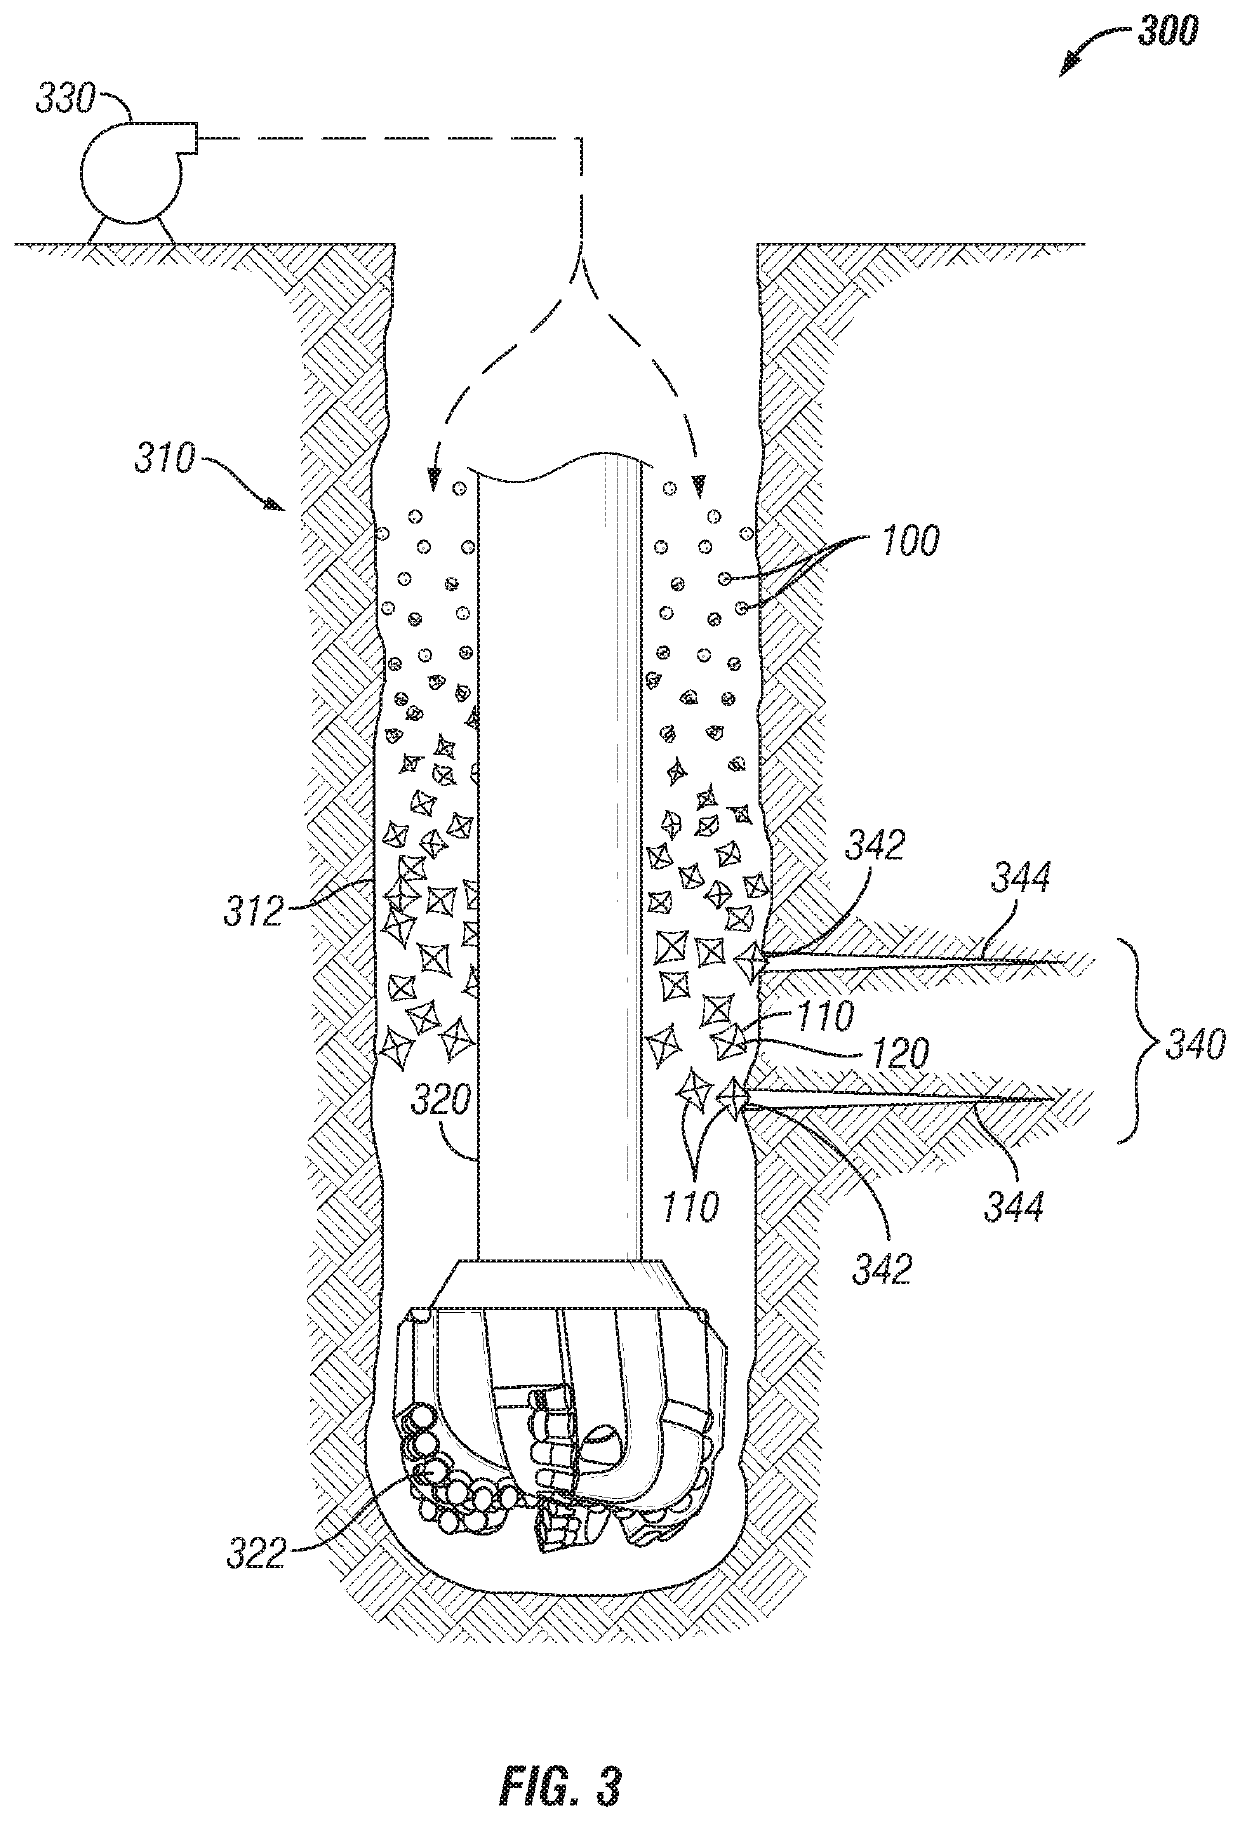 Unfoldable device for controlling loss circulation